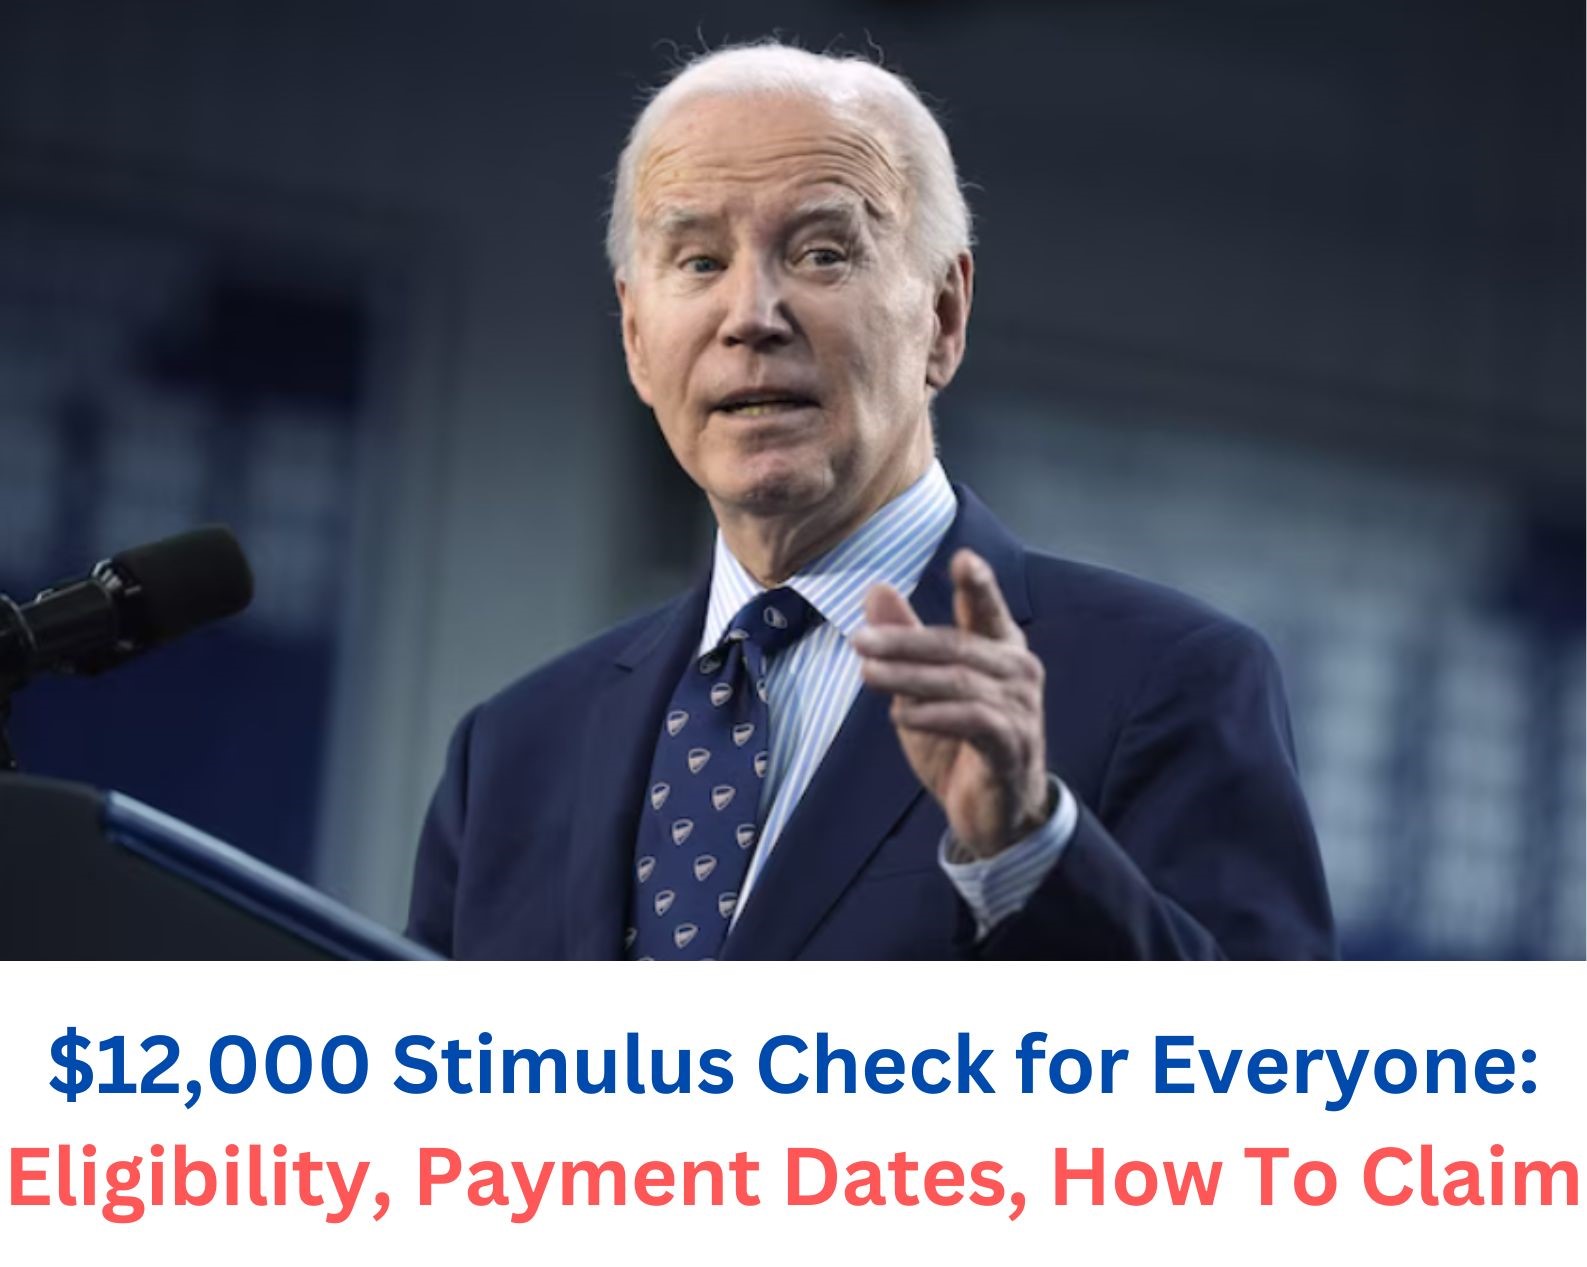 $12,000 Stimulus Check for Everyone: Eligibility, Payment Dates, How To Claim